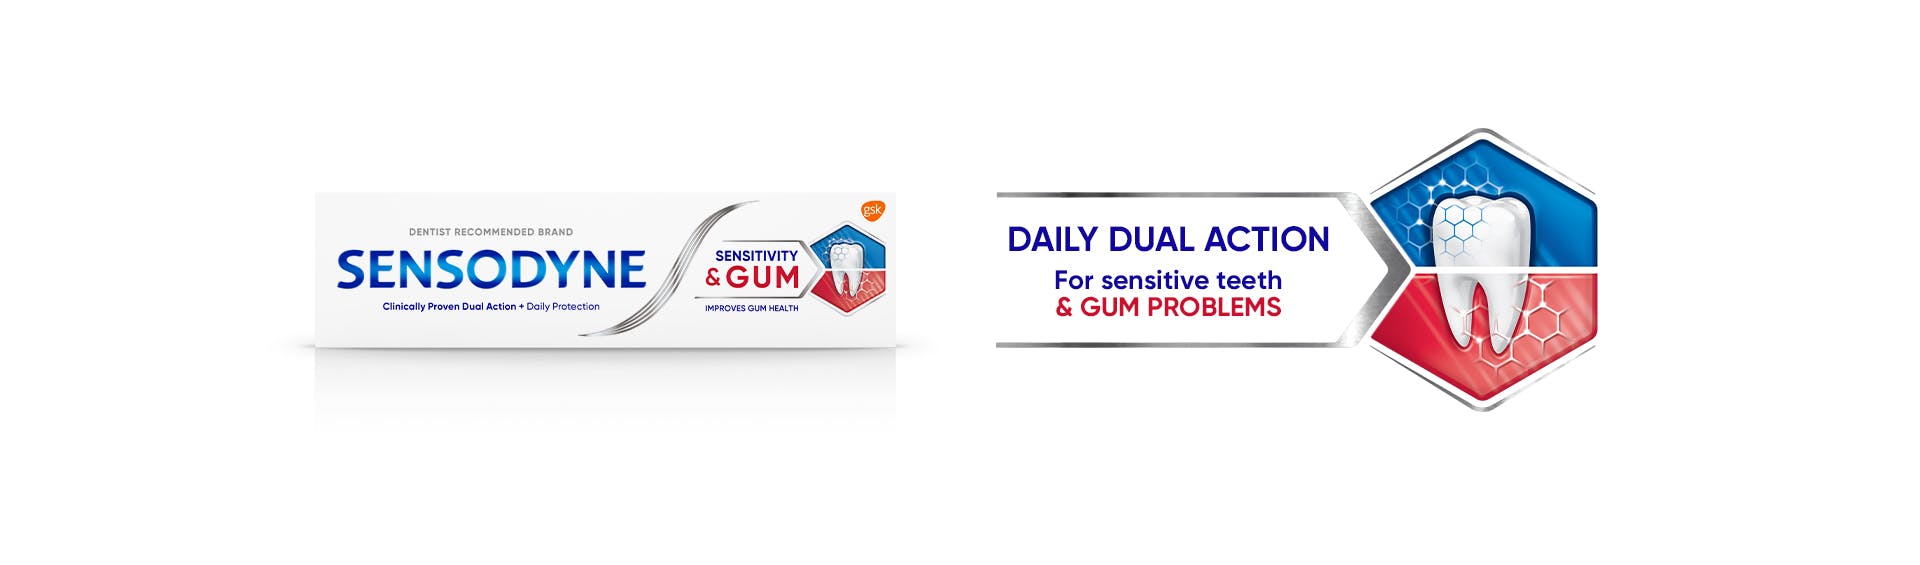 Dual relief from sensitive teeth banner